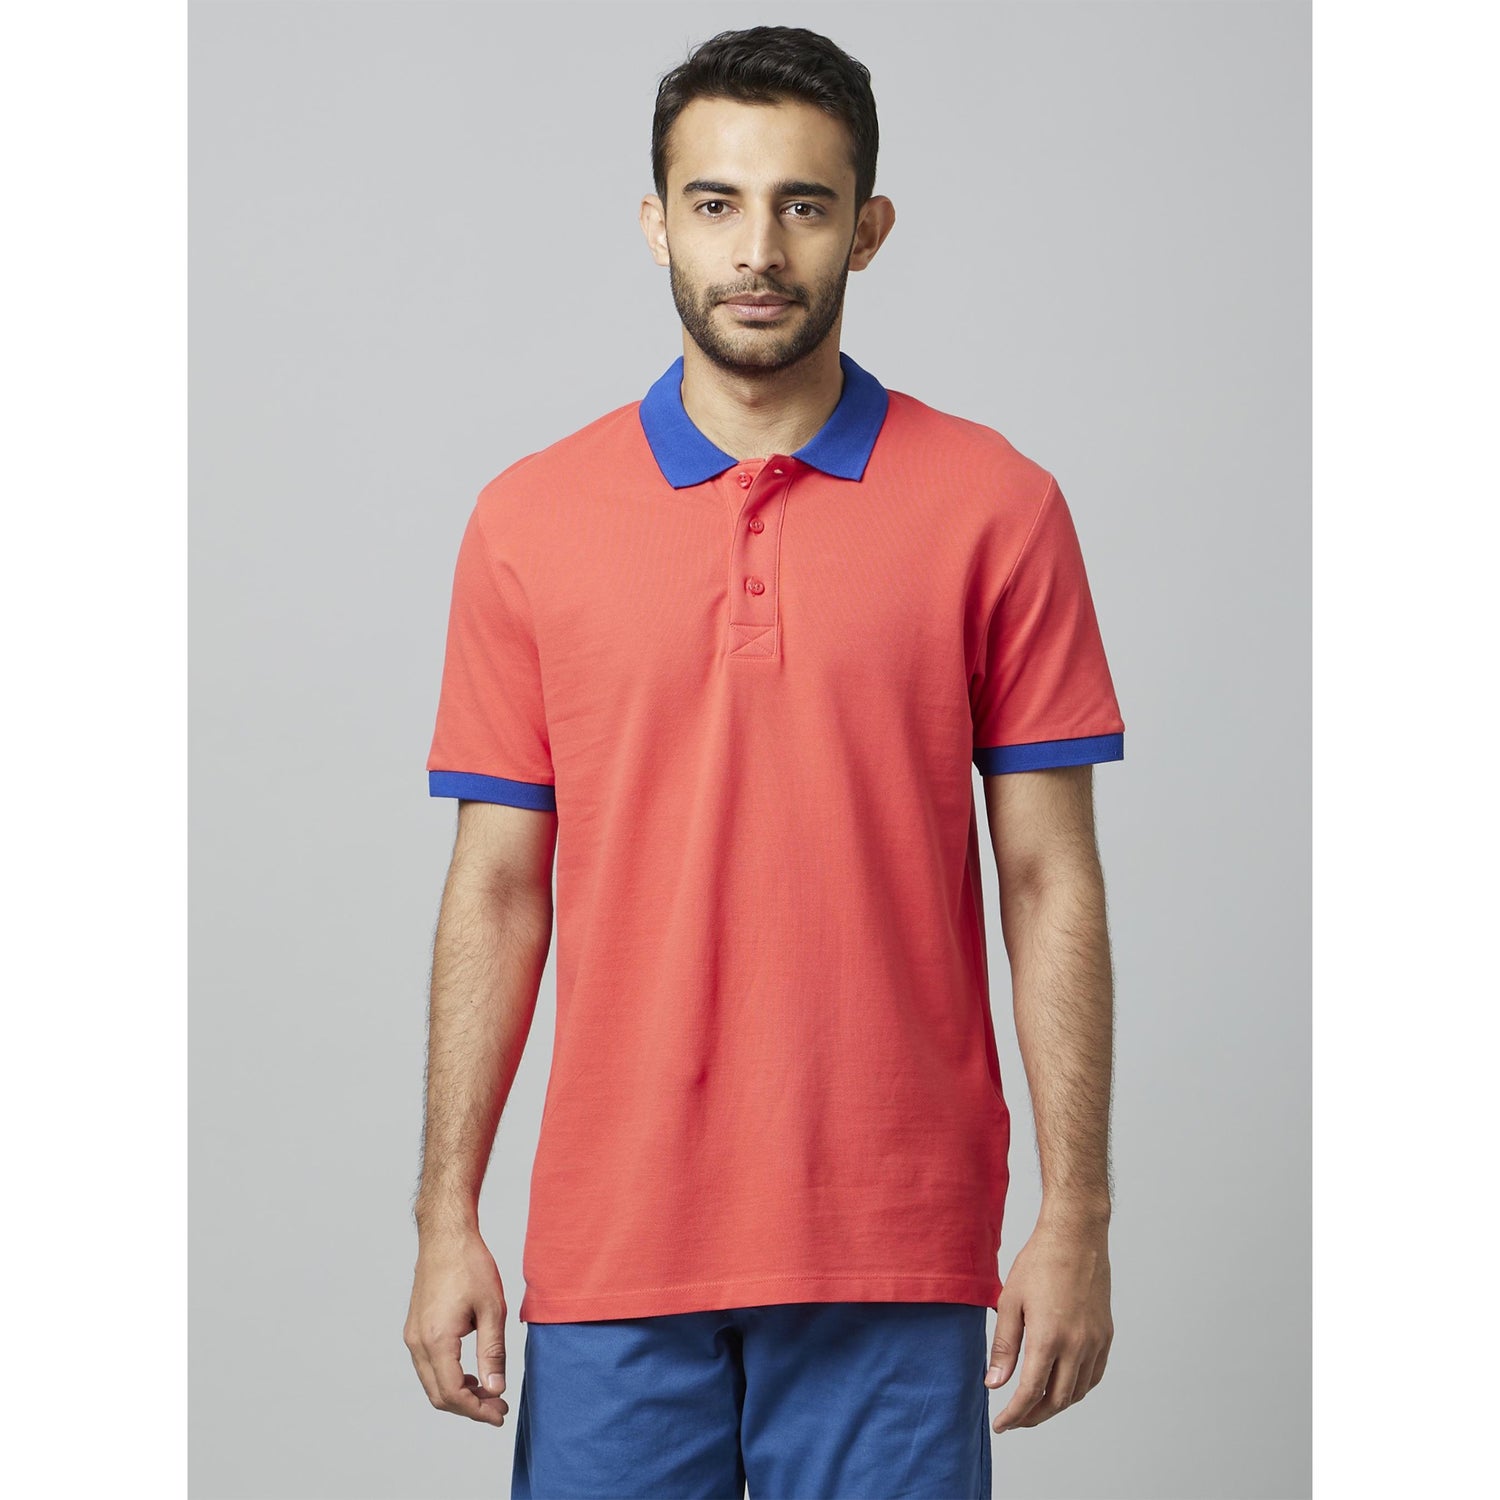 Celio Solid Red Half Sleeves Polo T-Shirt